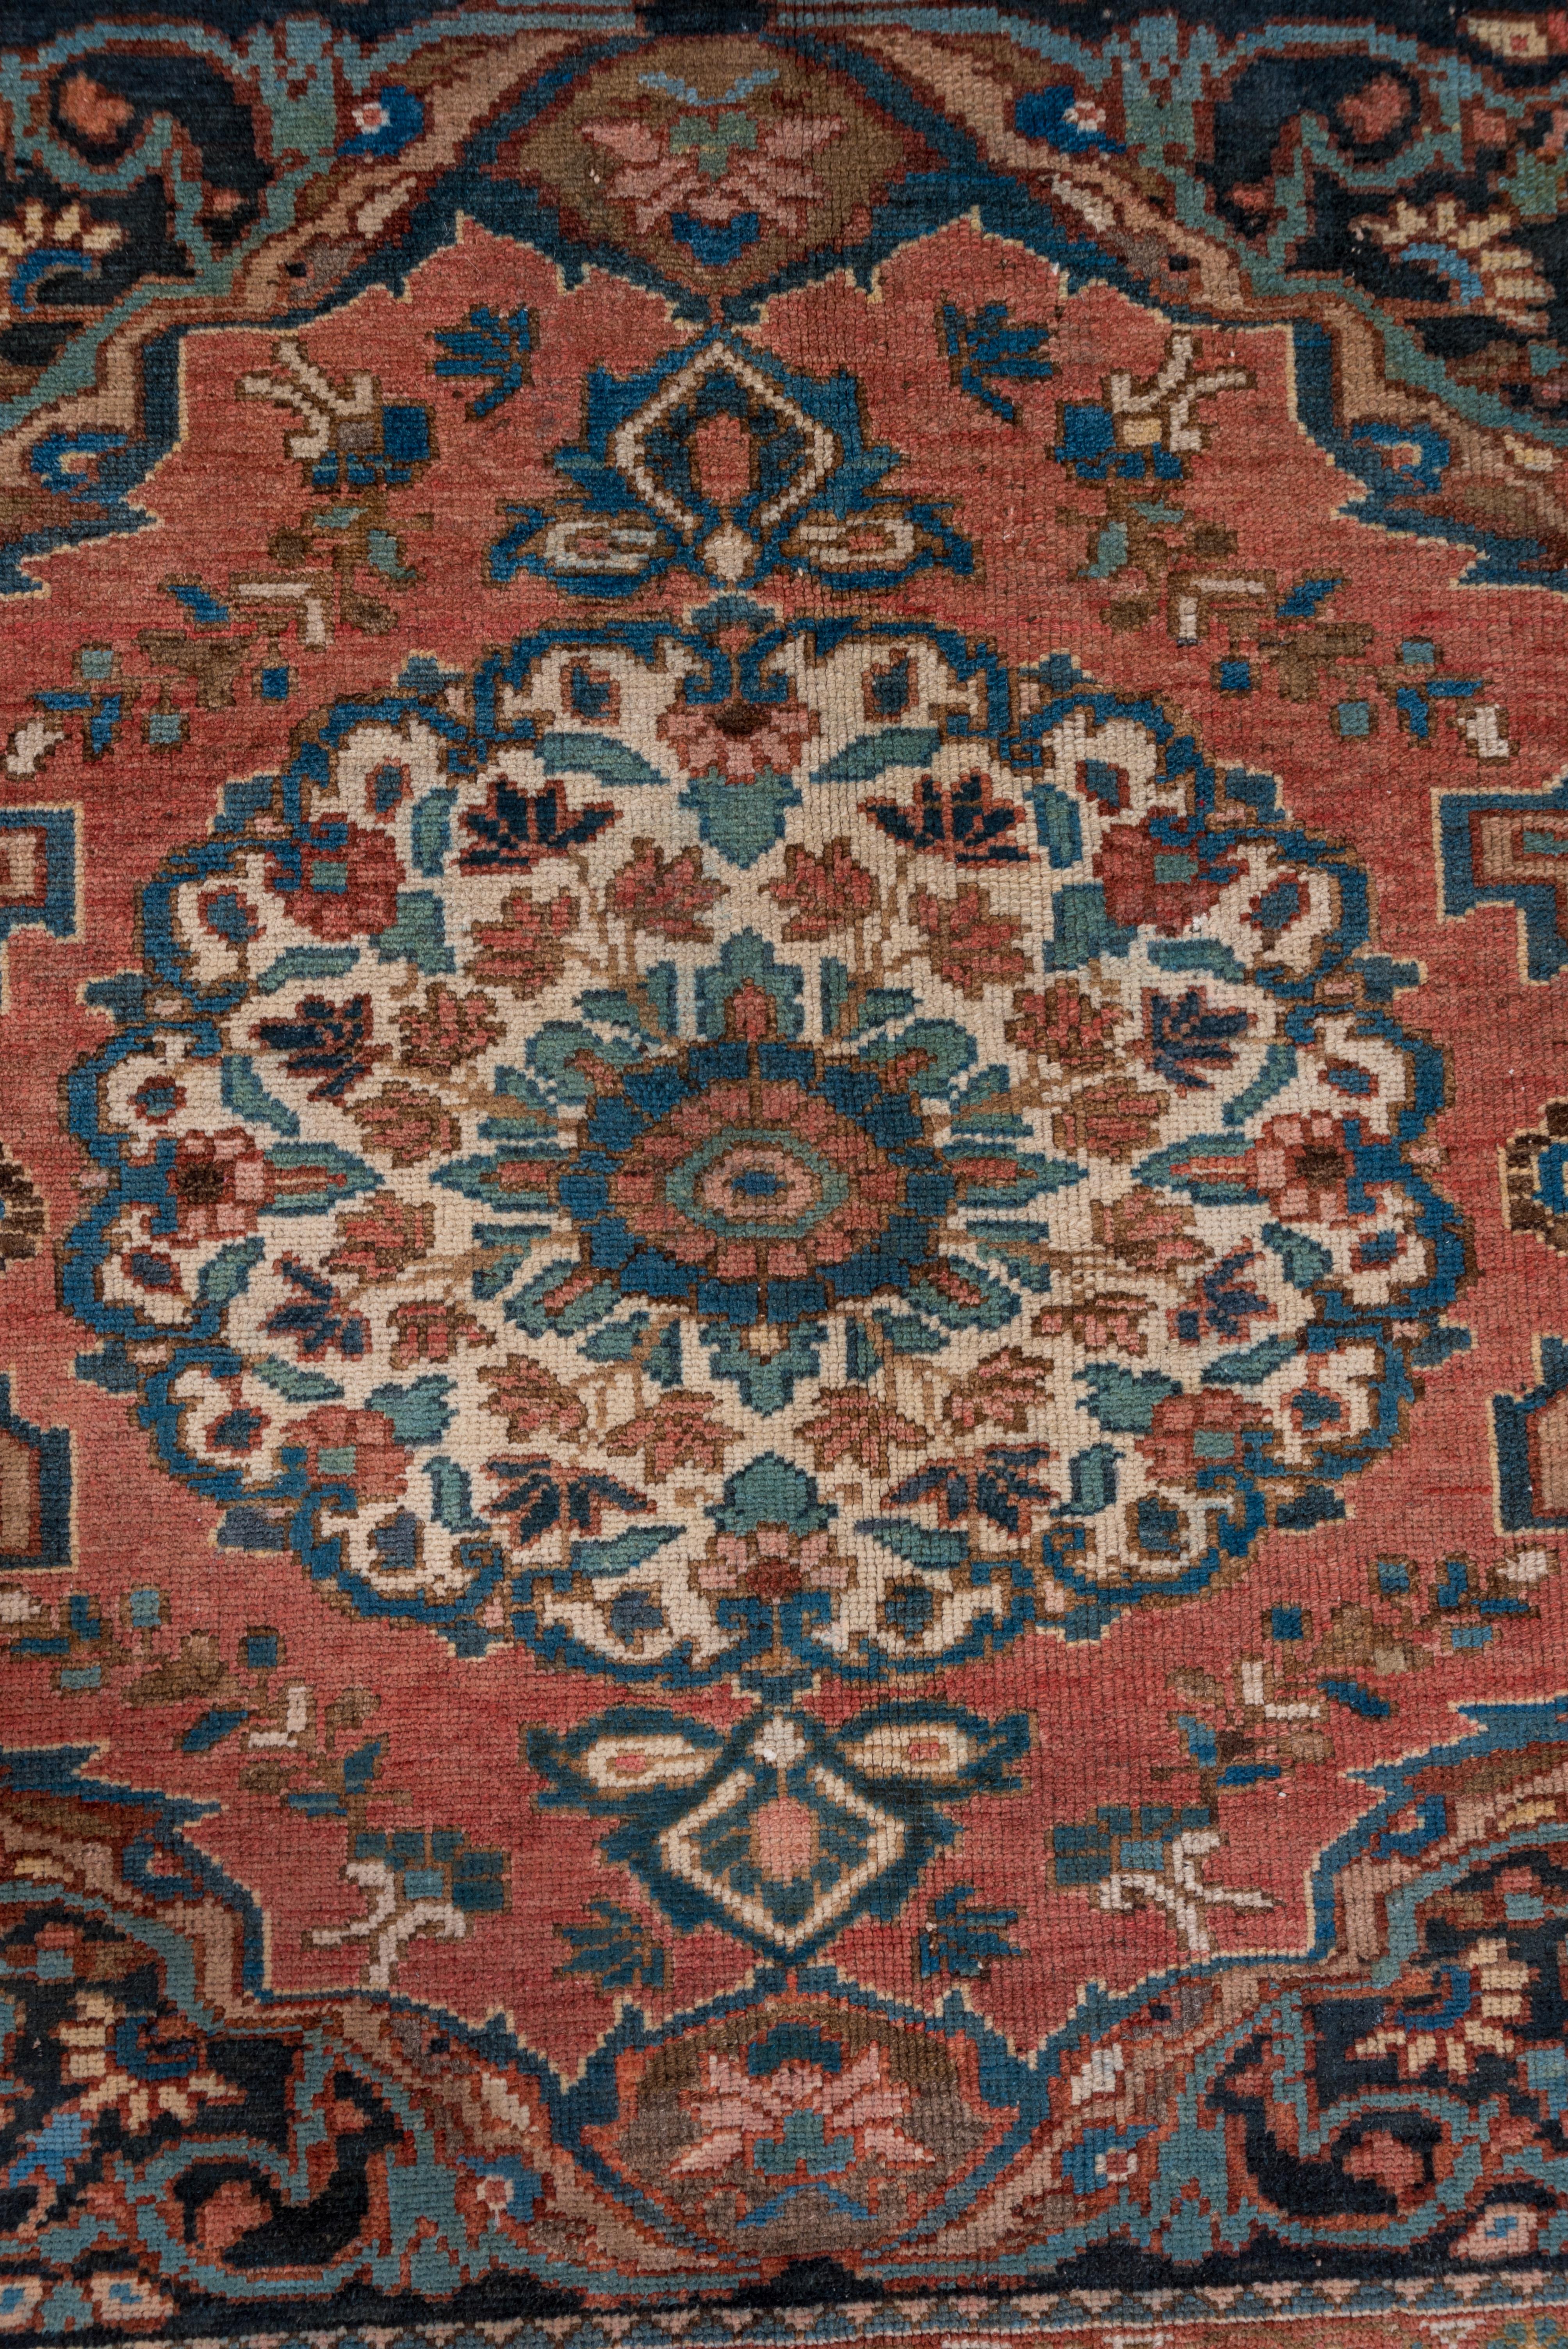 The navy field of this rustic central Persian Chahar Mahal rug is almost completely covered by four light red conjoined cartouches, each enclosing an ivory pendanted floral roundel with piecrust edges.Light blue tendrils fill in around the major